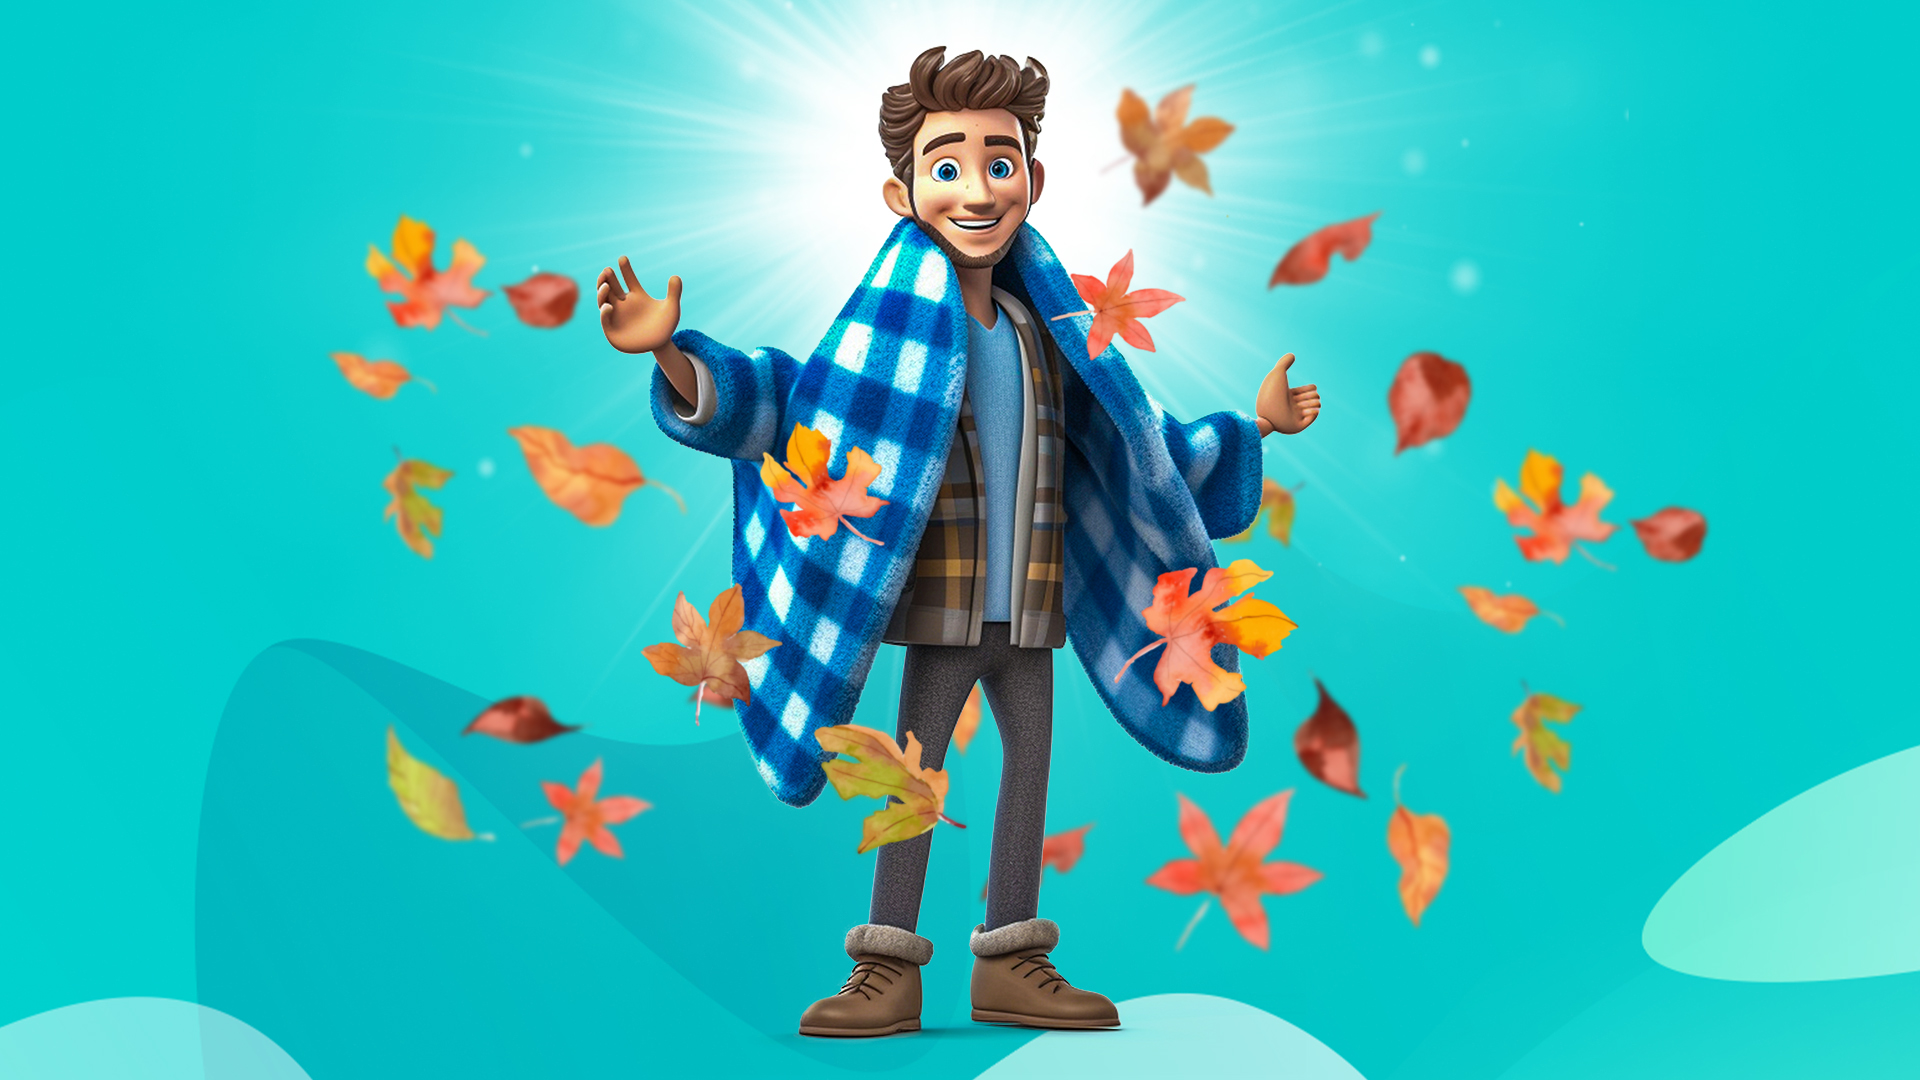 Cartoon man standing with a blue blanket surrounded by fall leaves, set against a teal background.